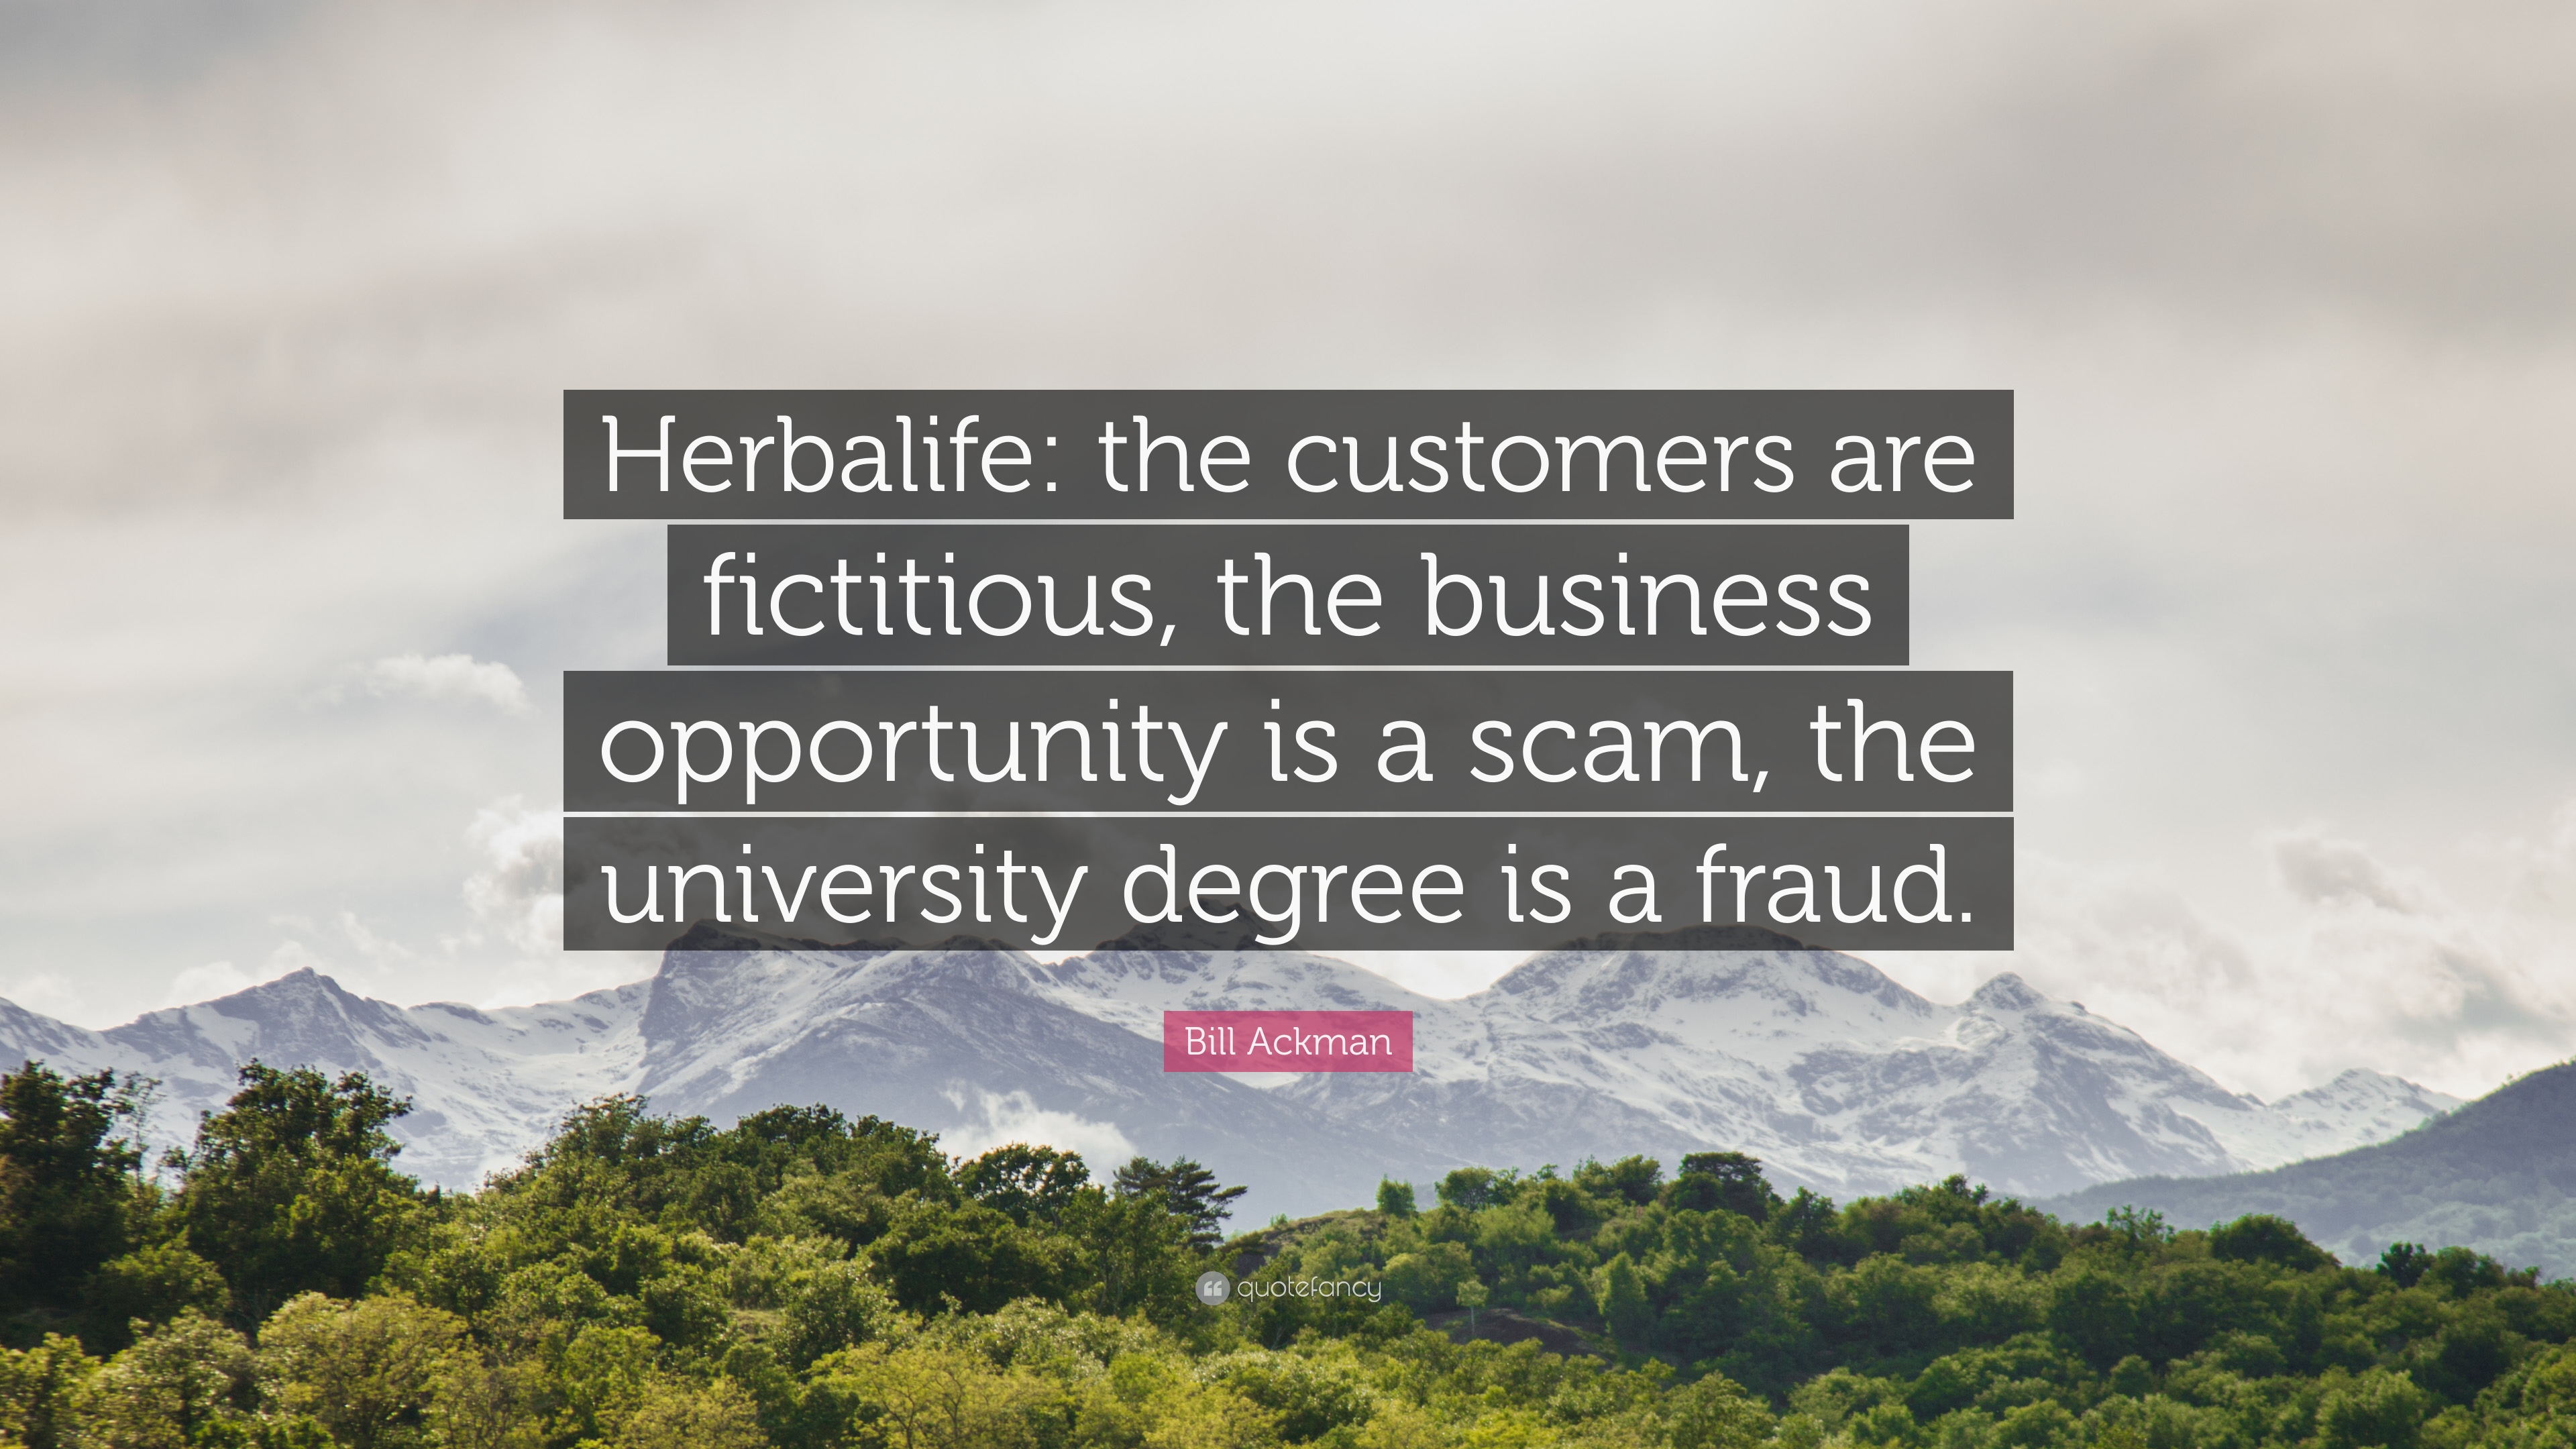 Bill Ackman Quote: “Herbalife: the customers are fictitious